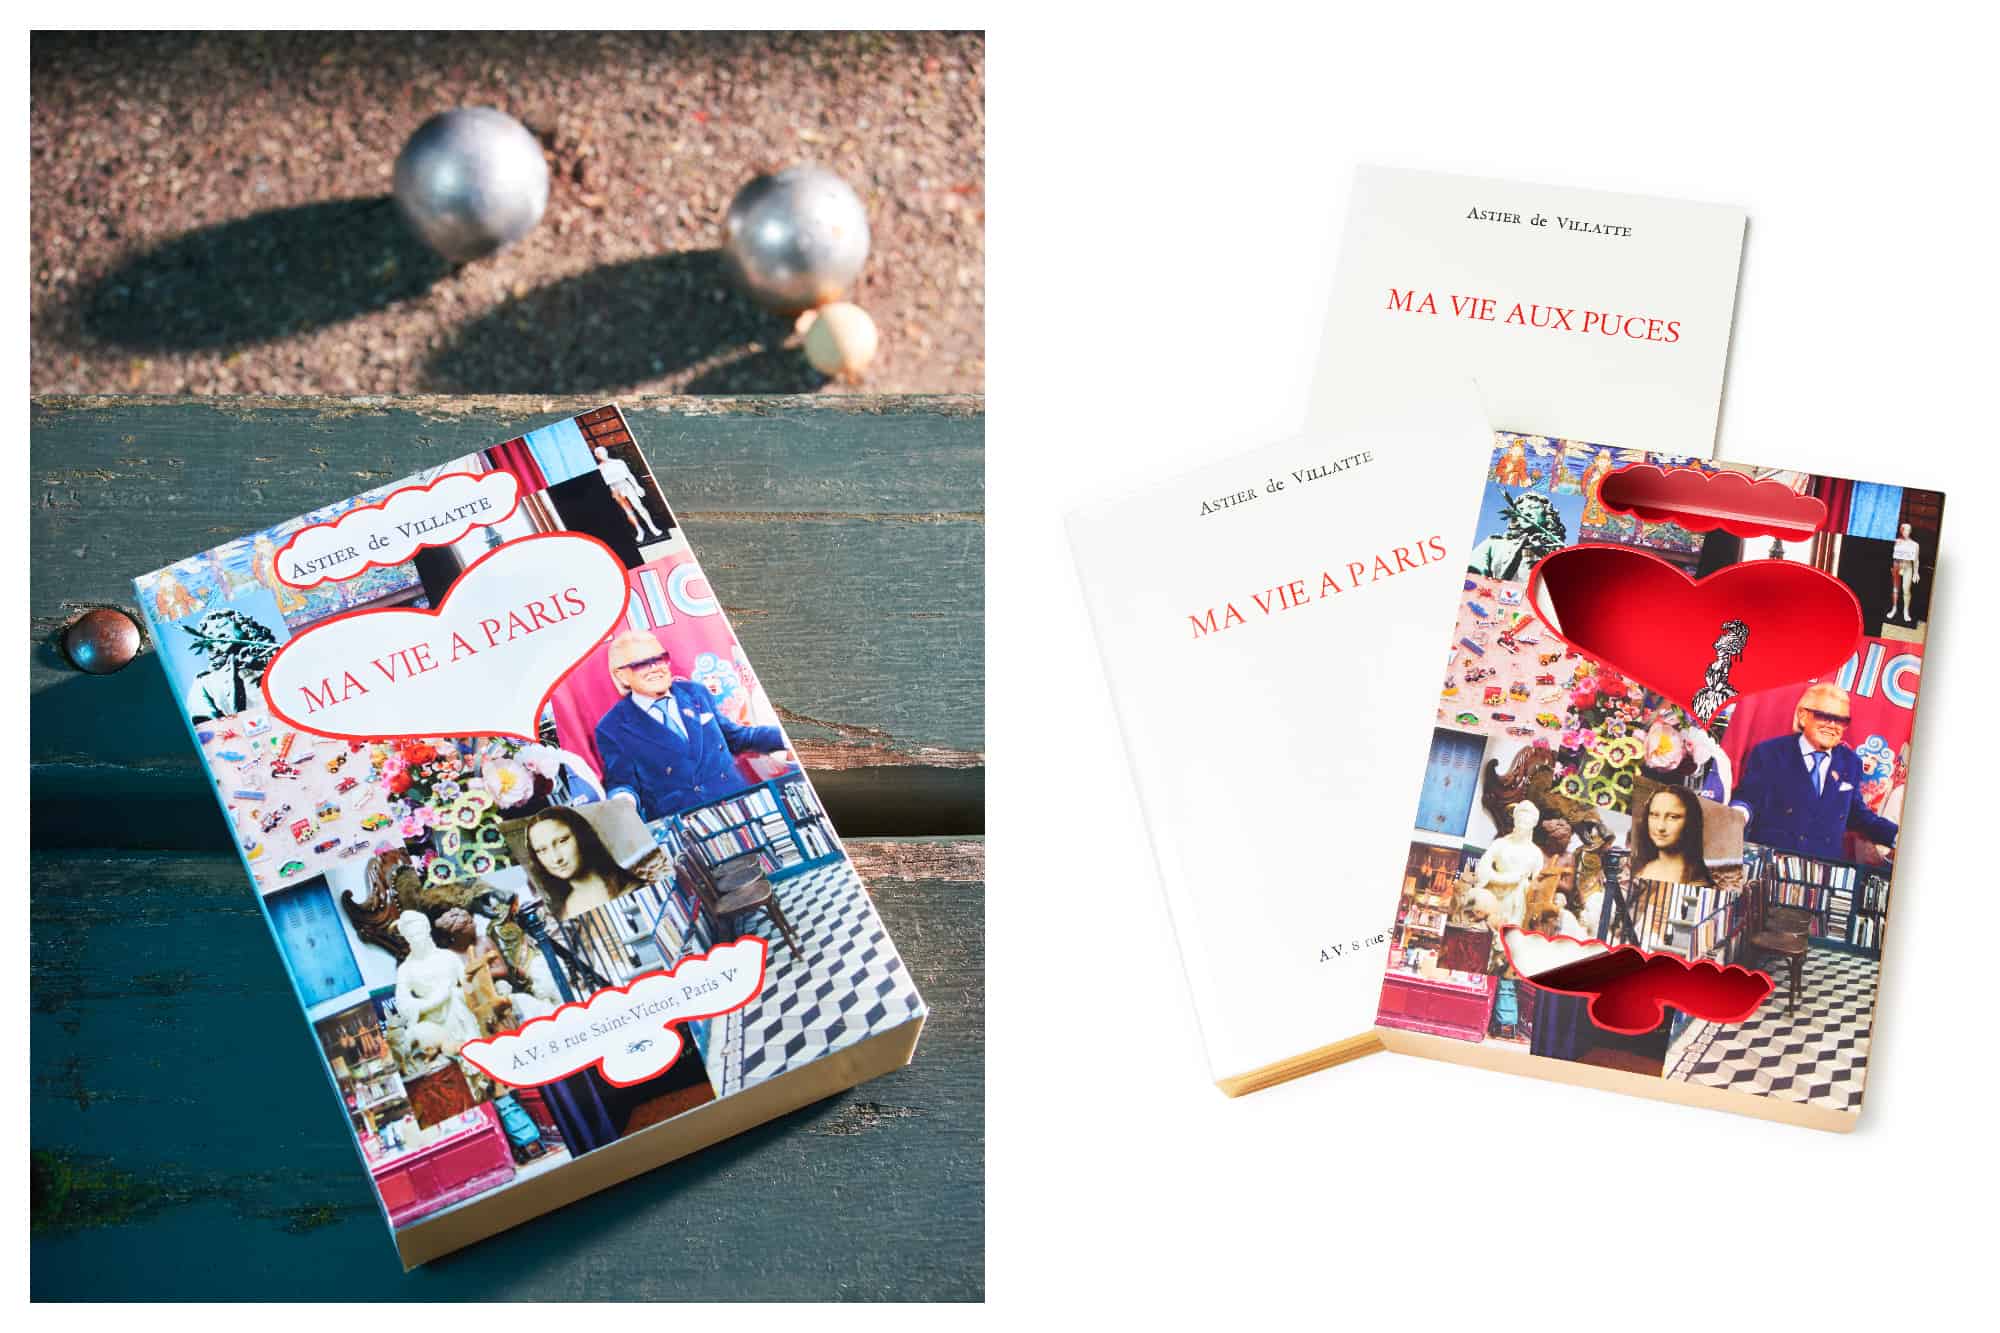 On the left is a copy of Astier de Villate's Ma Vie a Paris, sat on a wooden bench, below which are a few Petanque balls on sandy ground. On the right are a copies of Ma Vie a Paris and Ma Vie Aux Puces.